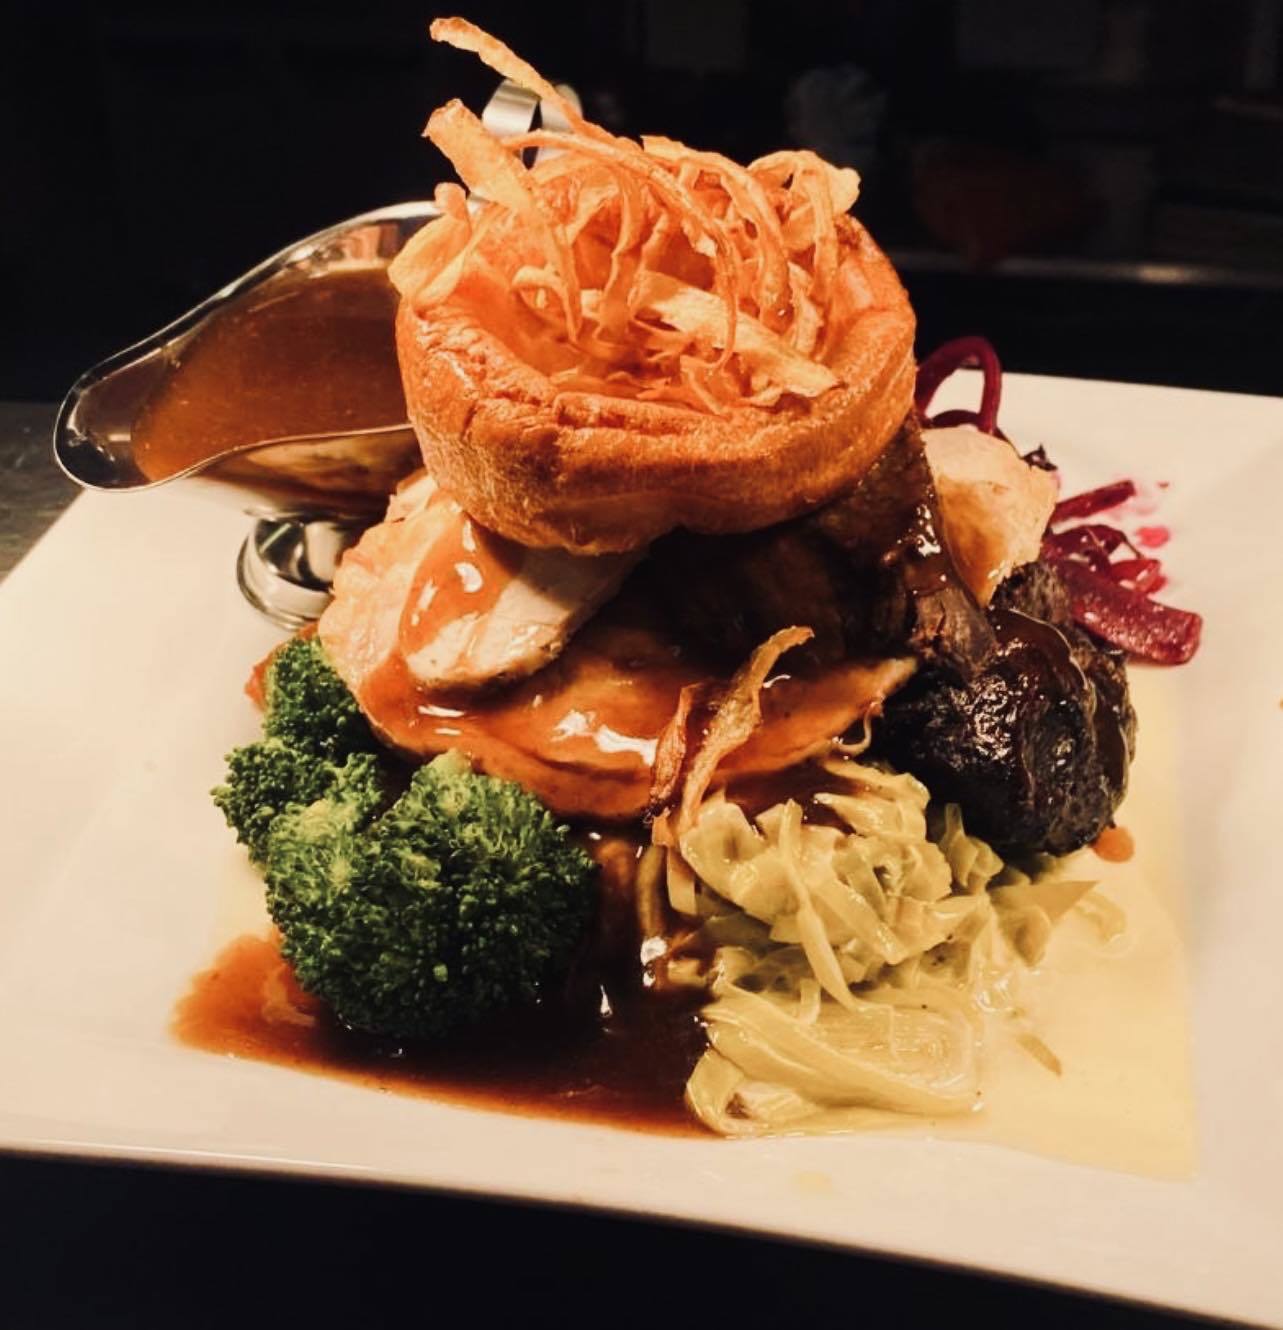 Roast dinners are served with Yorkshire puddings topped with shaved parsnips and lots of gravy